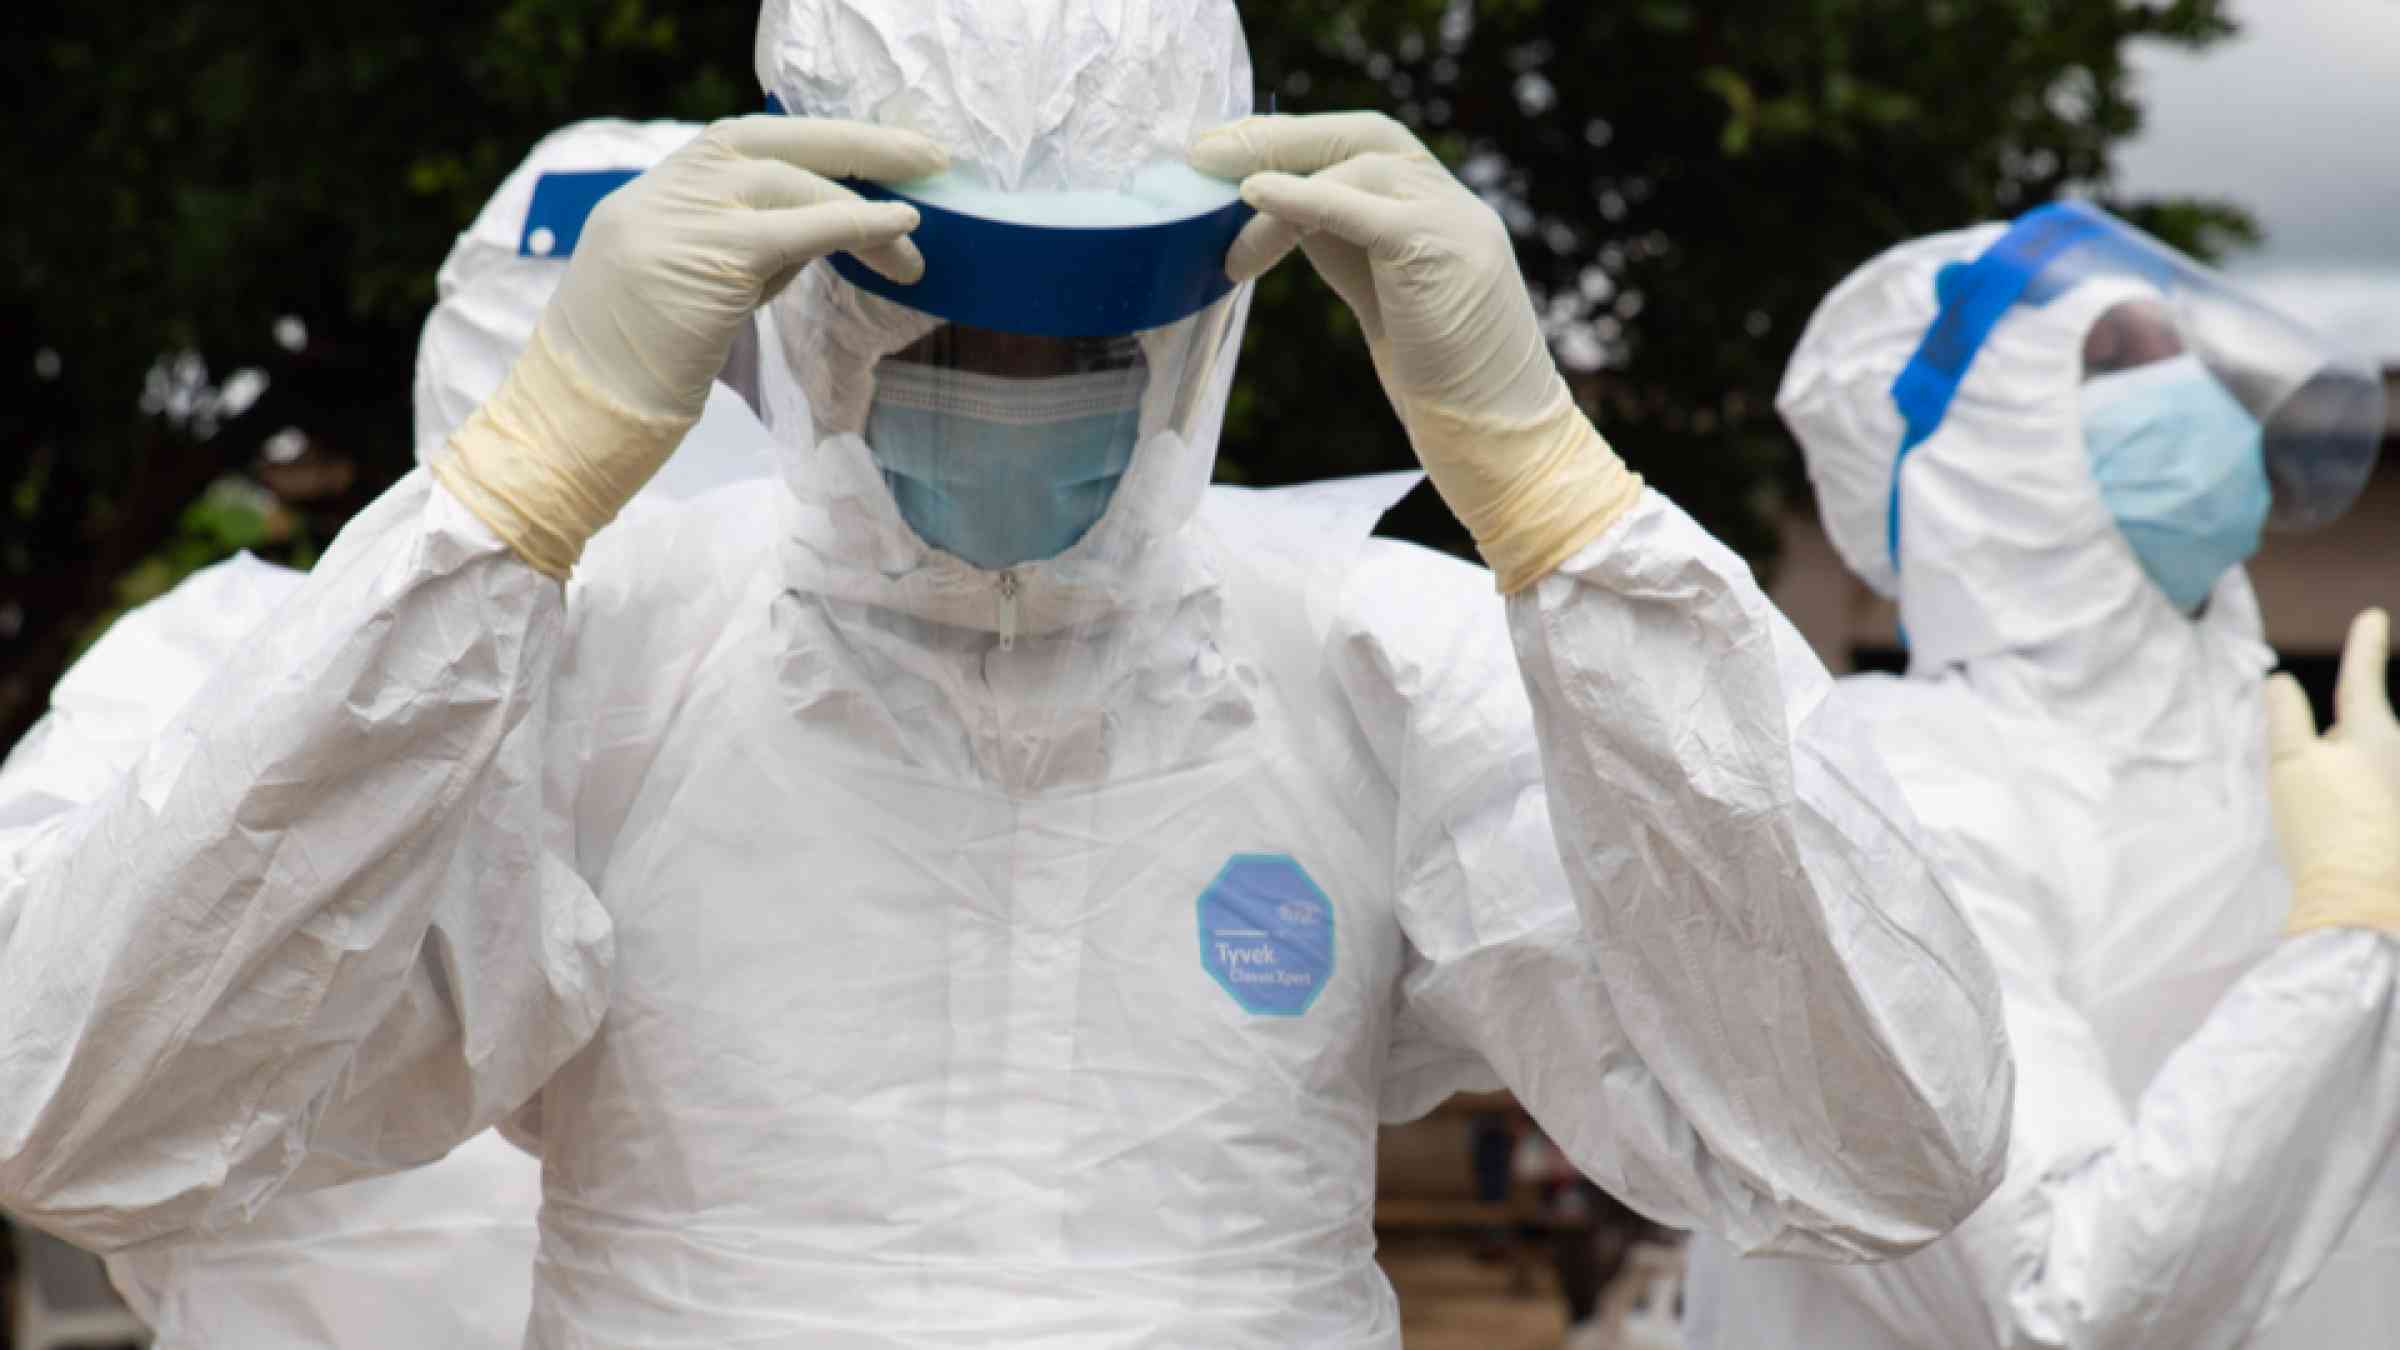 Burial team during the Ebola epidemic in Sierra Leone, 2015